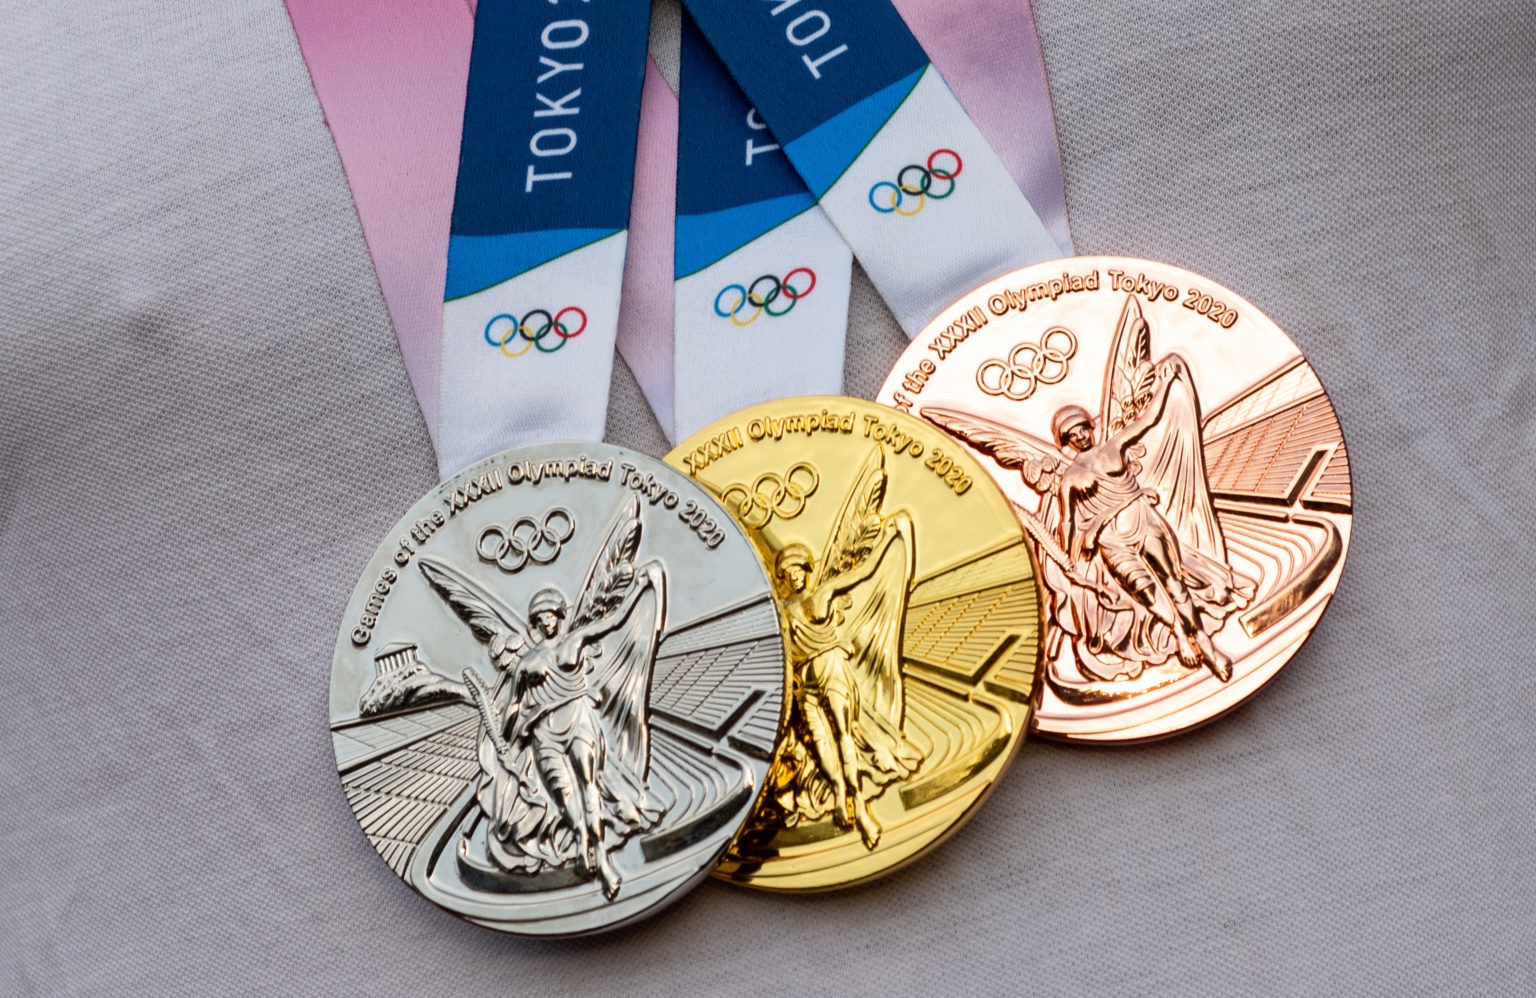 Olympic Medals 1536x998 